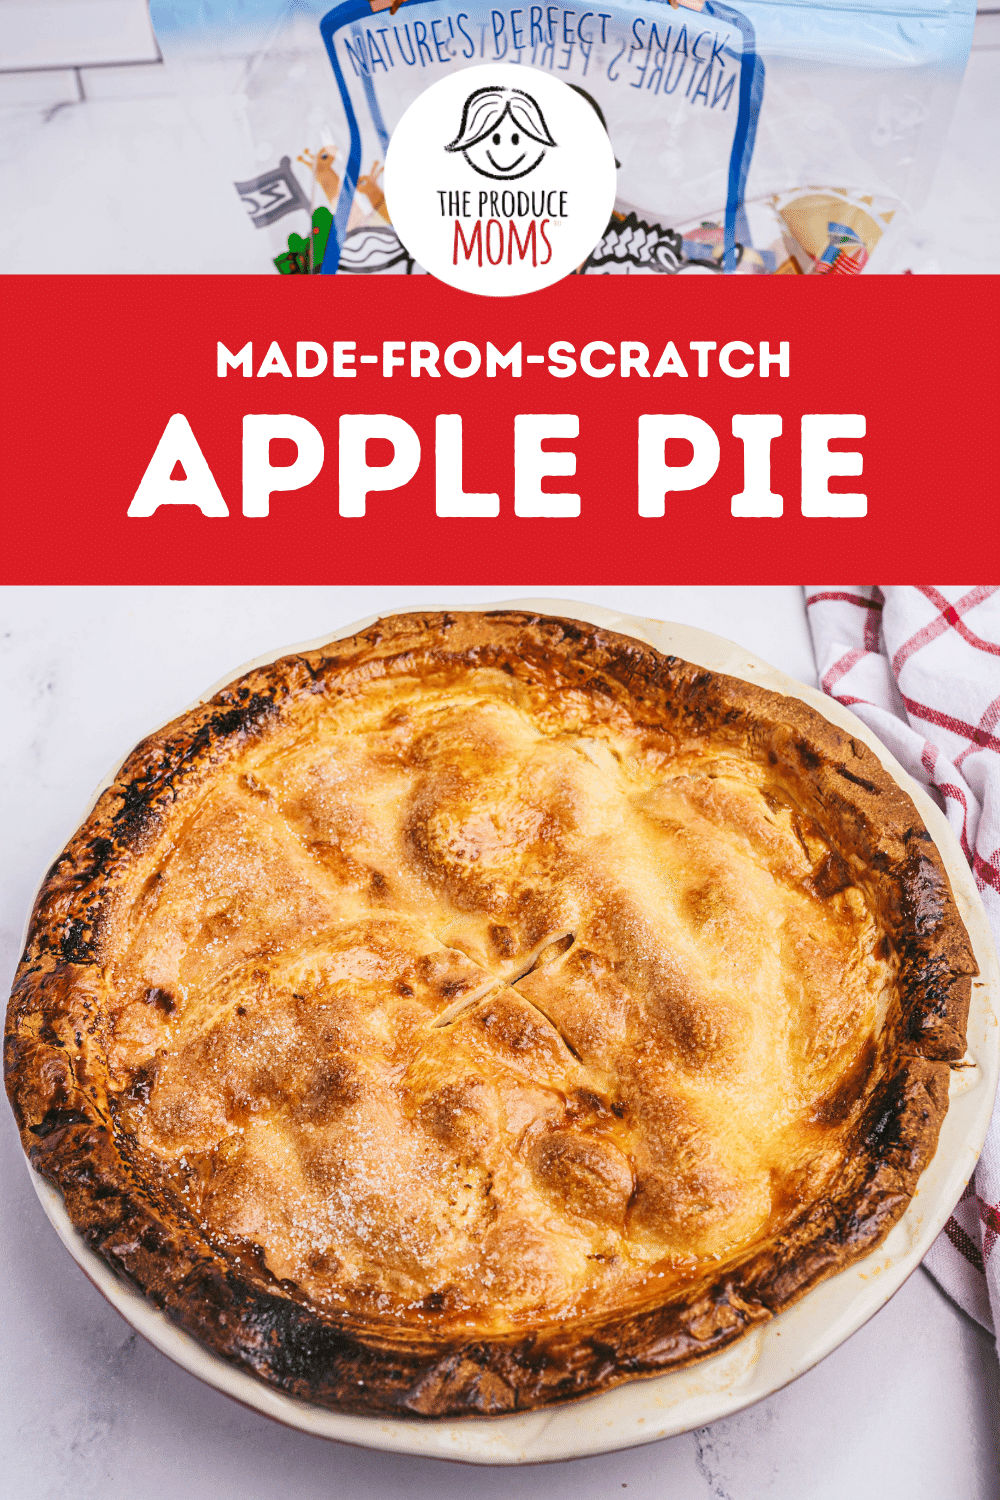 Made-From-Scratch Apple Pie